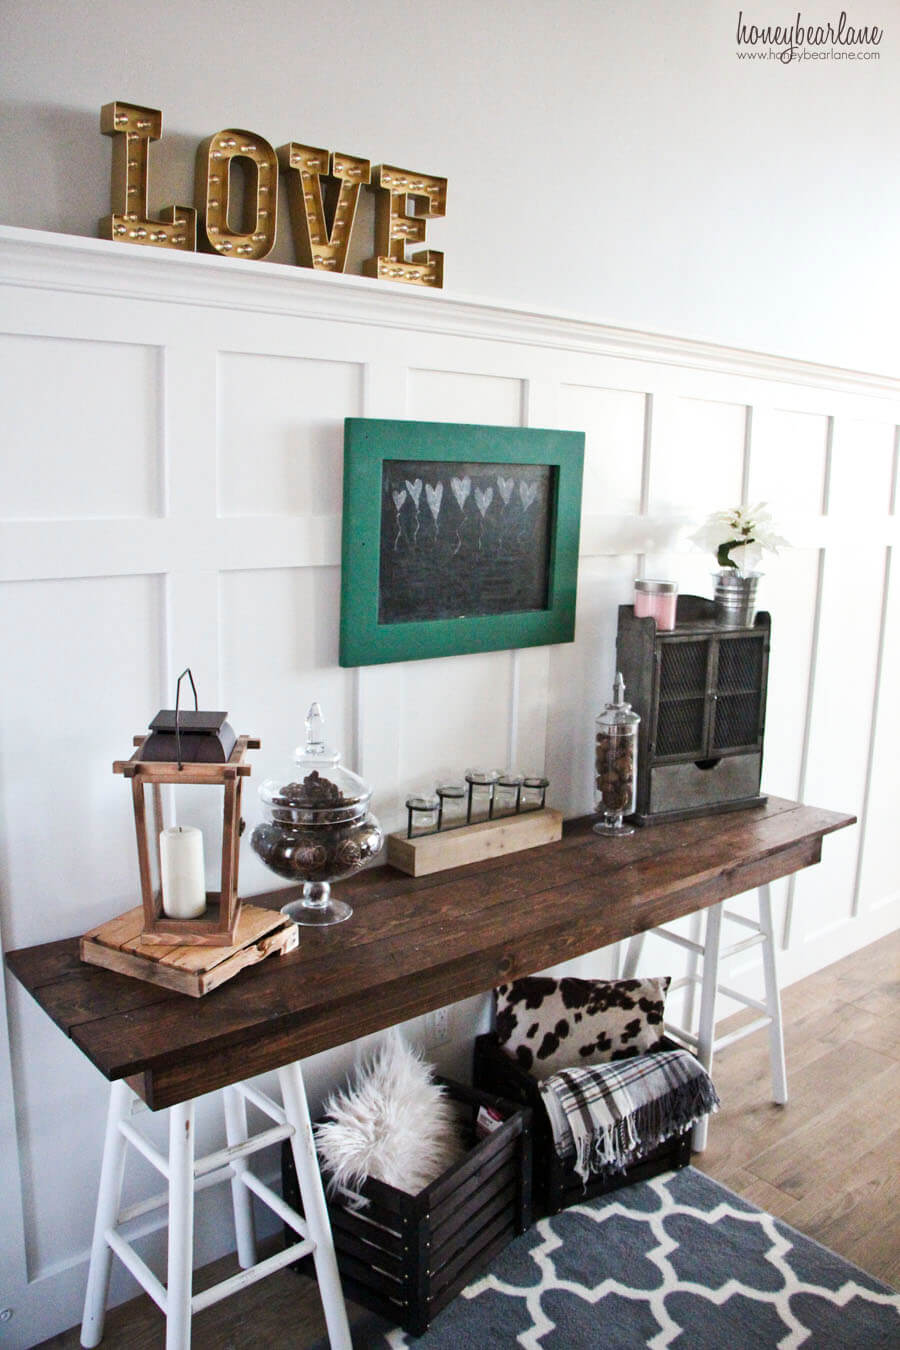 Create a Table with Reclaimed Wood